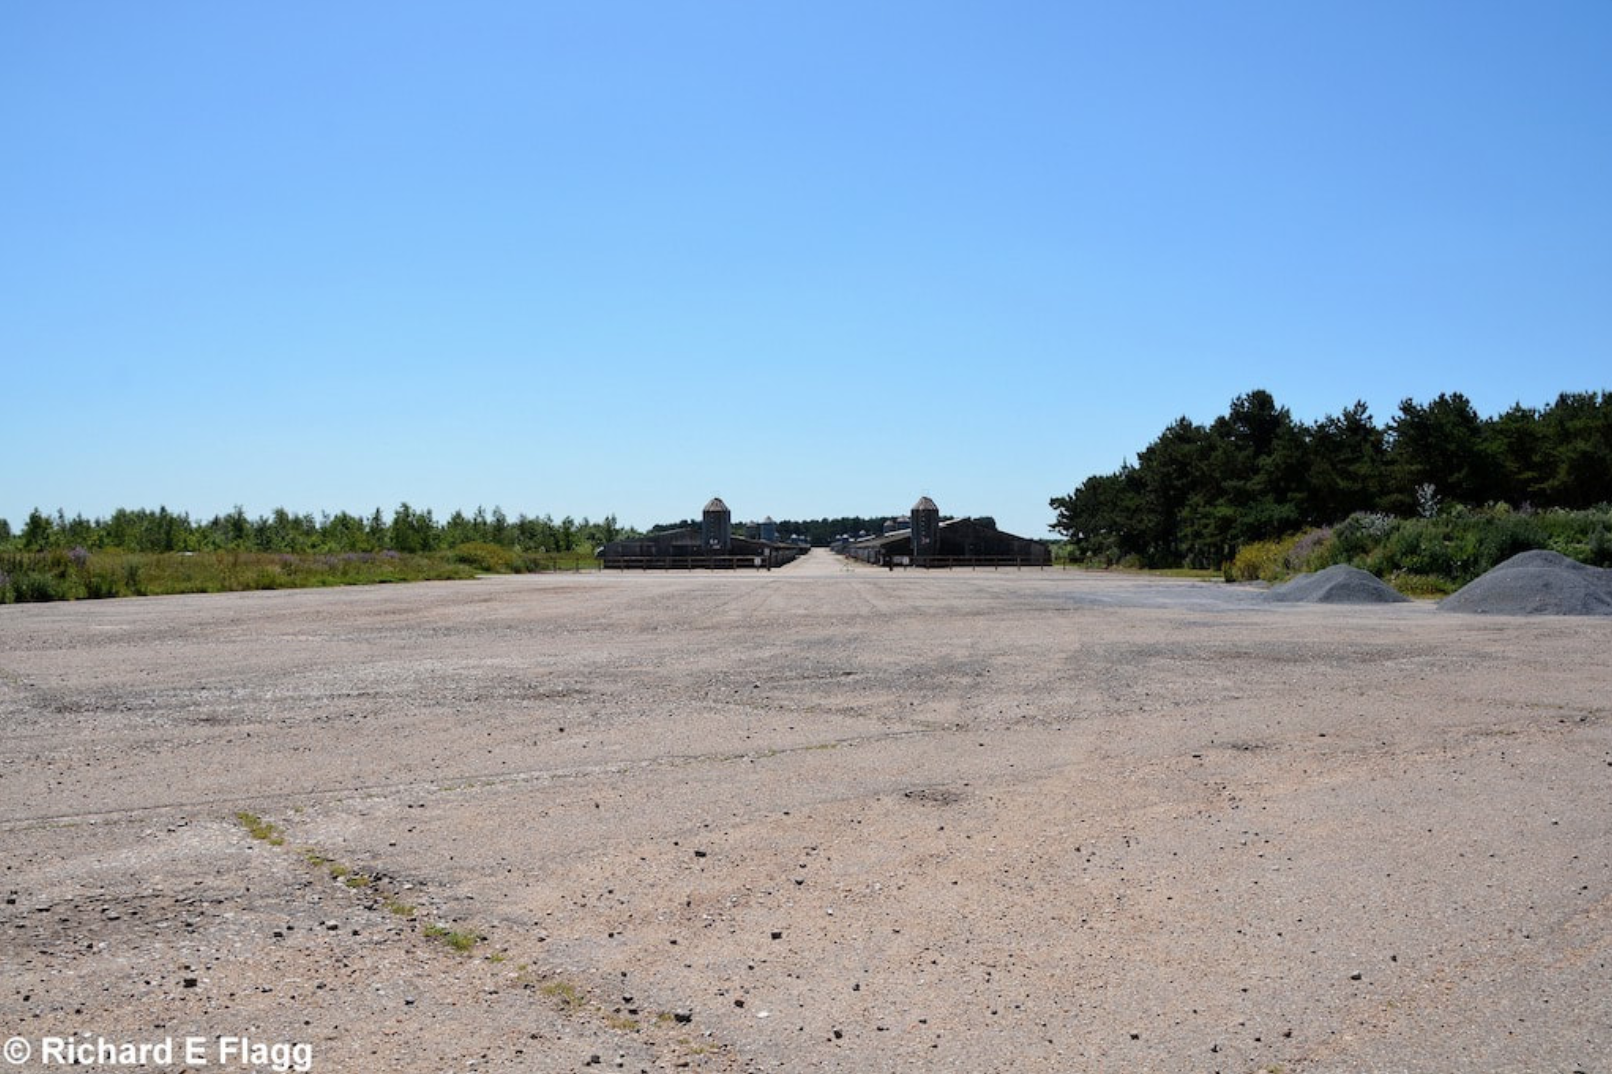 019Runway 02:20. Looking south from the runway 07:25 intersection - 30 June 2015.png